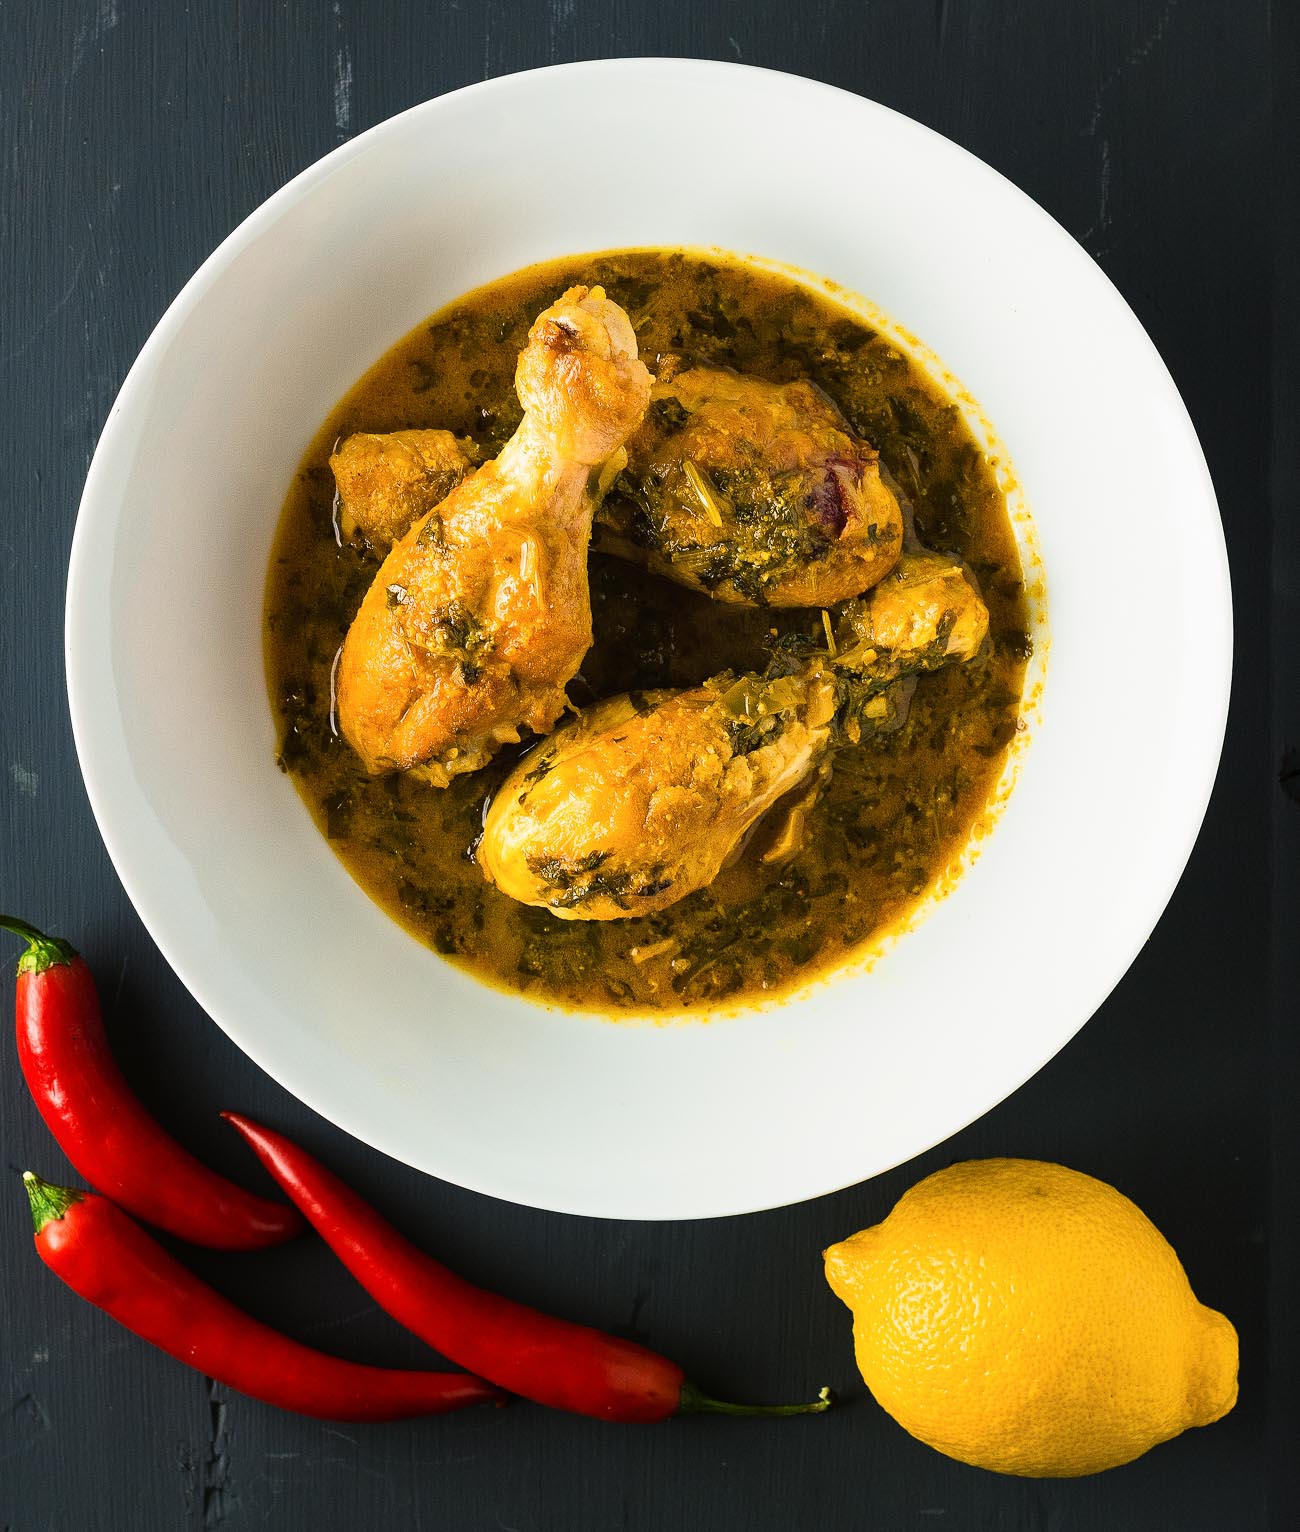 Lemon coriander chicken curry is a bright tasting Indian curry that's big on flavour.